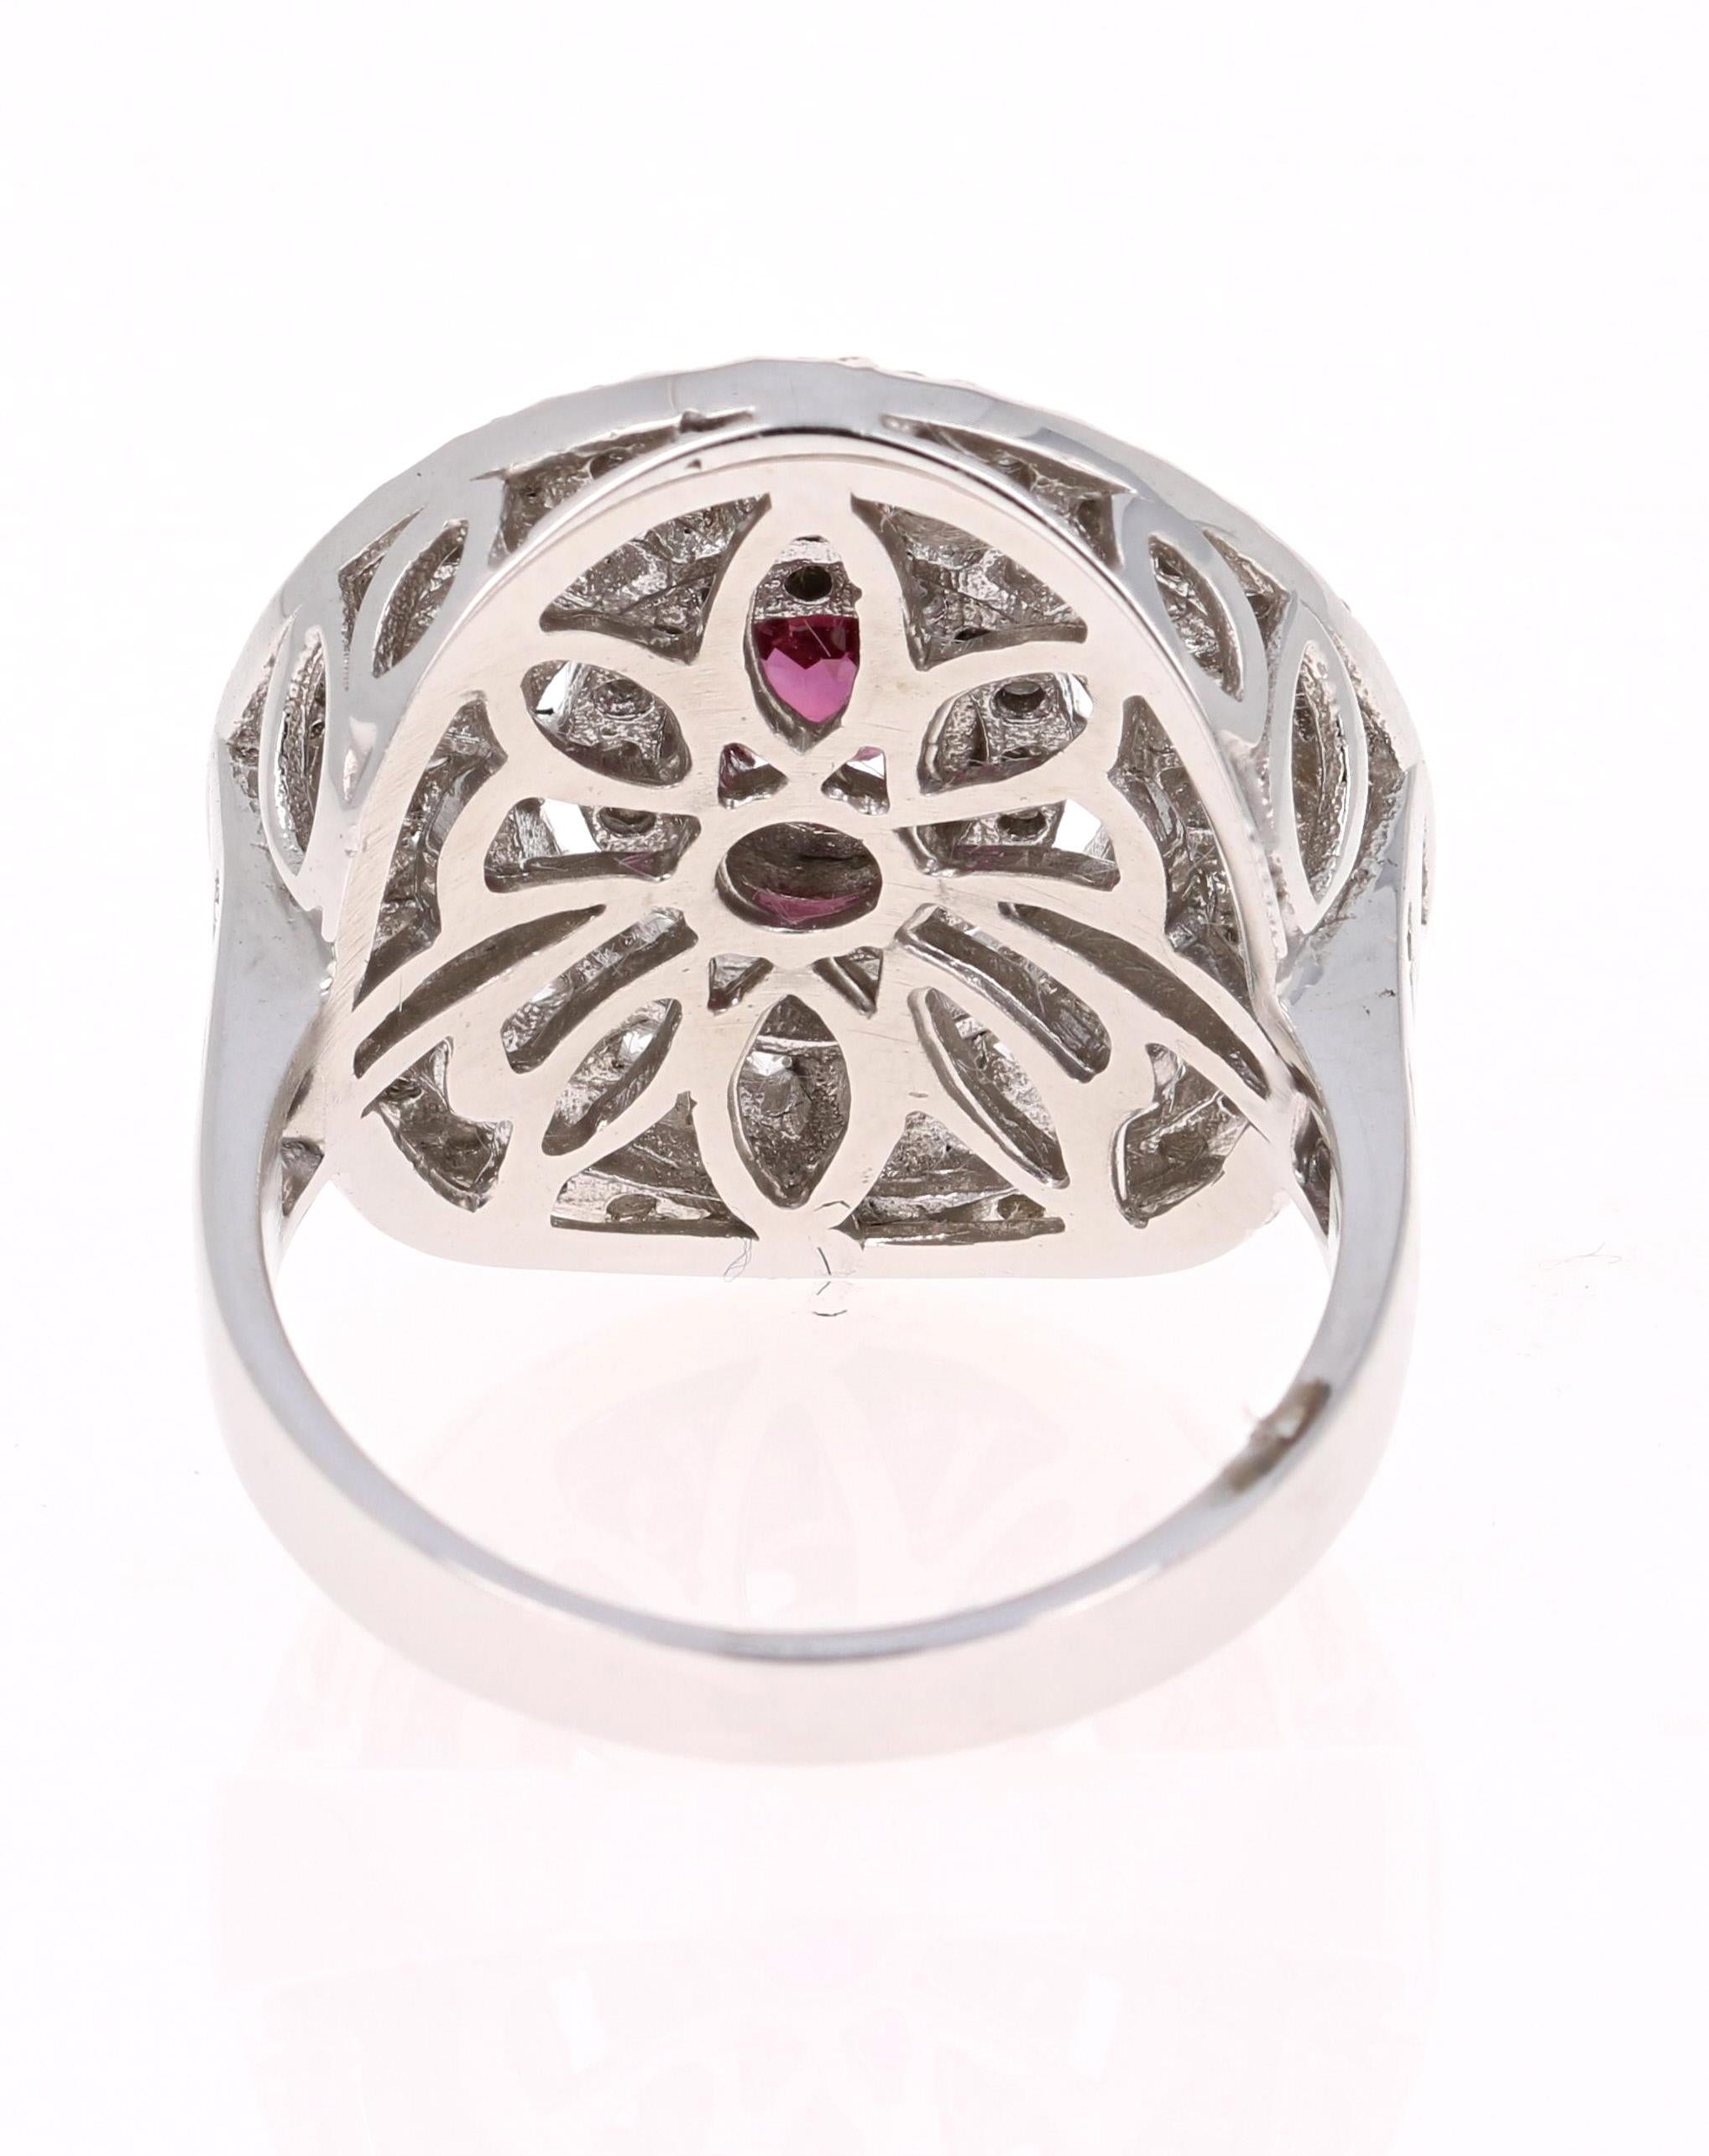 Oval Cut 2.41 Carat Ruby Diamond White Gold Cocktail Ring